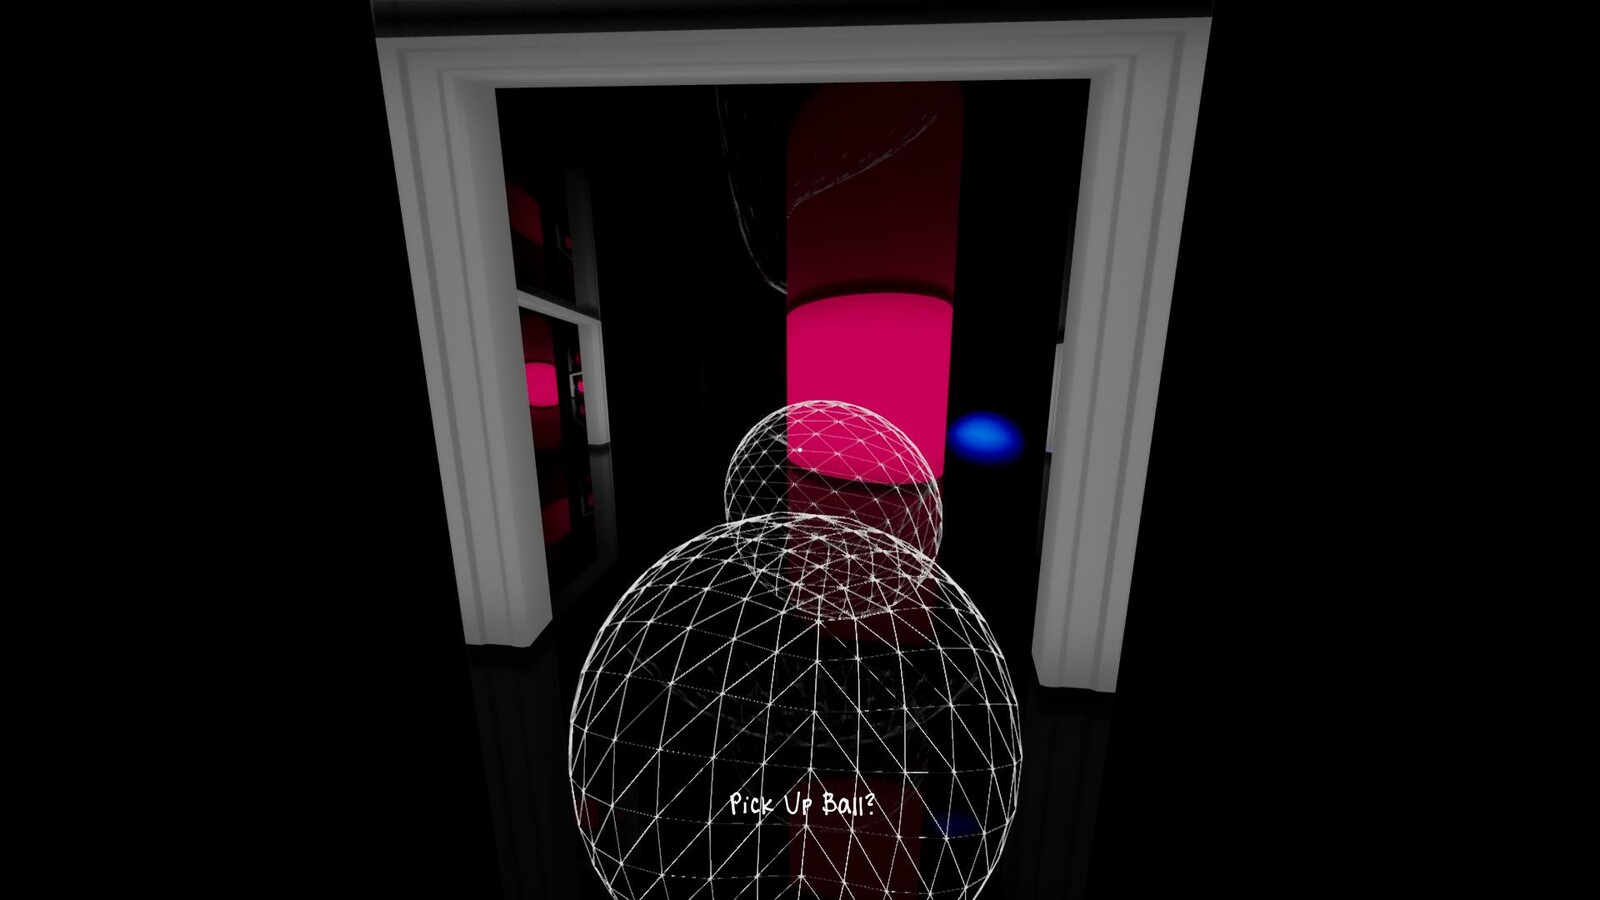 The doorways show where they lead after the player has entered them or put the ball through them. If the player has not interacted with the door it is a mirror instead.